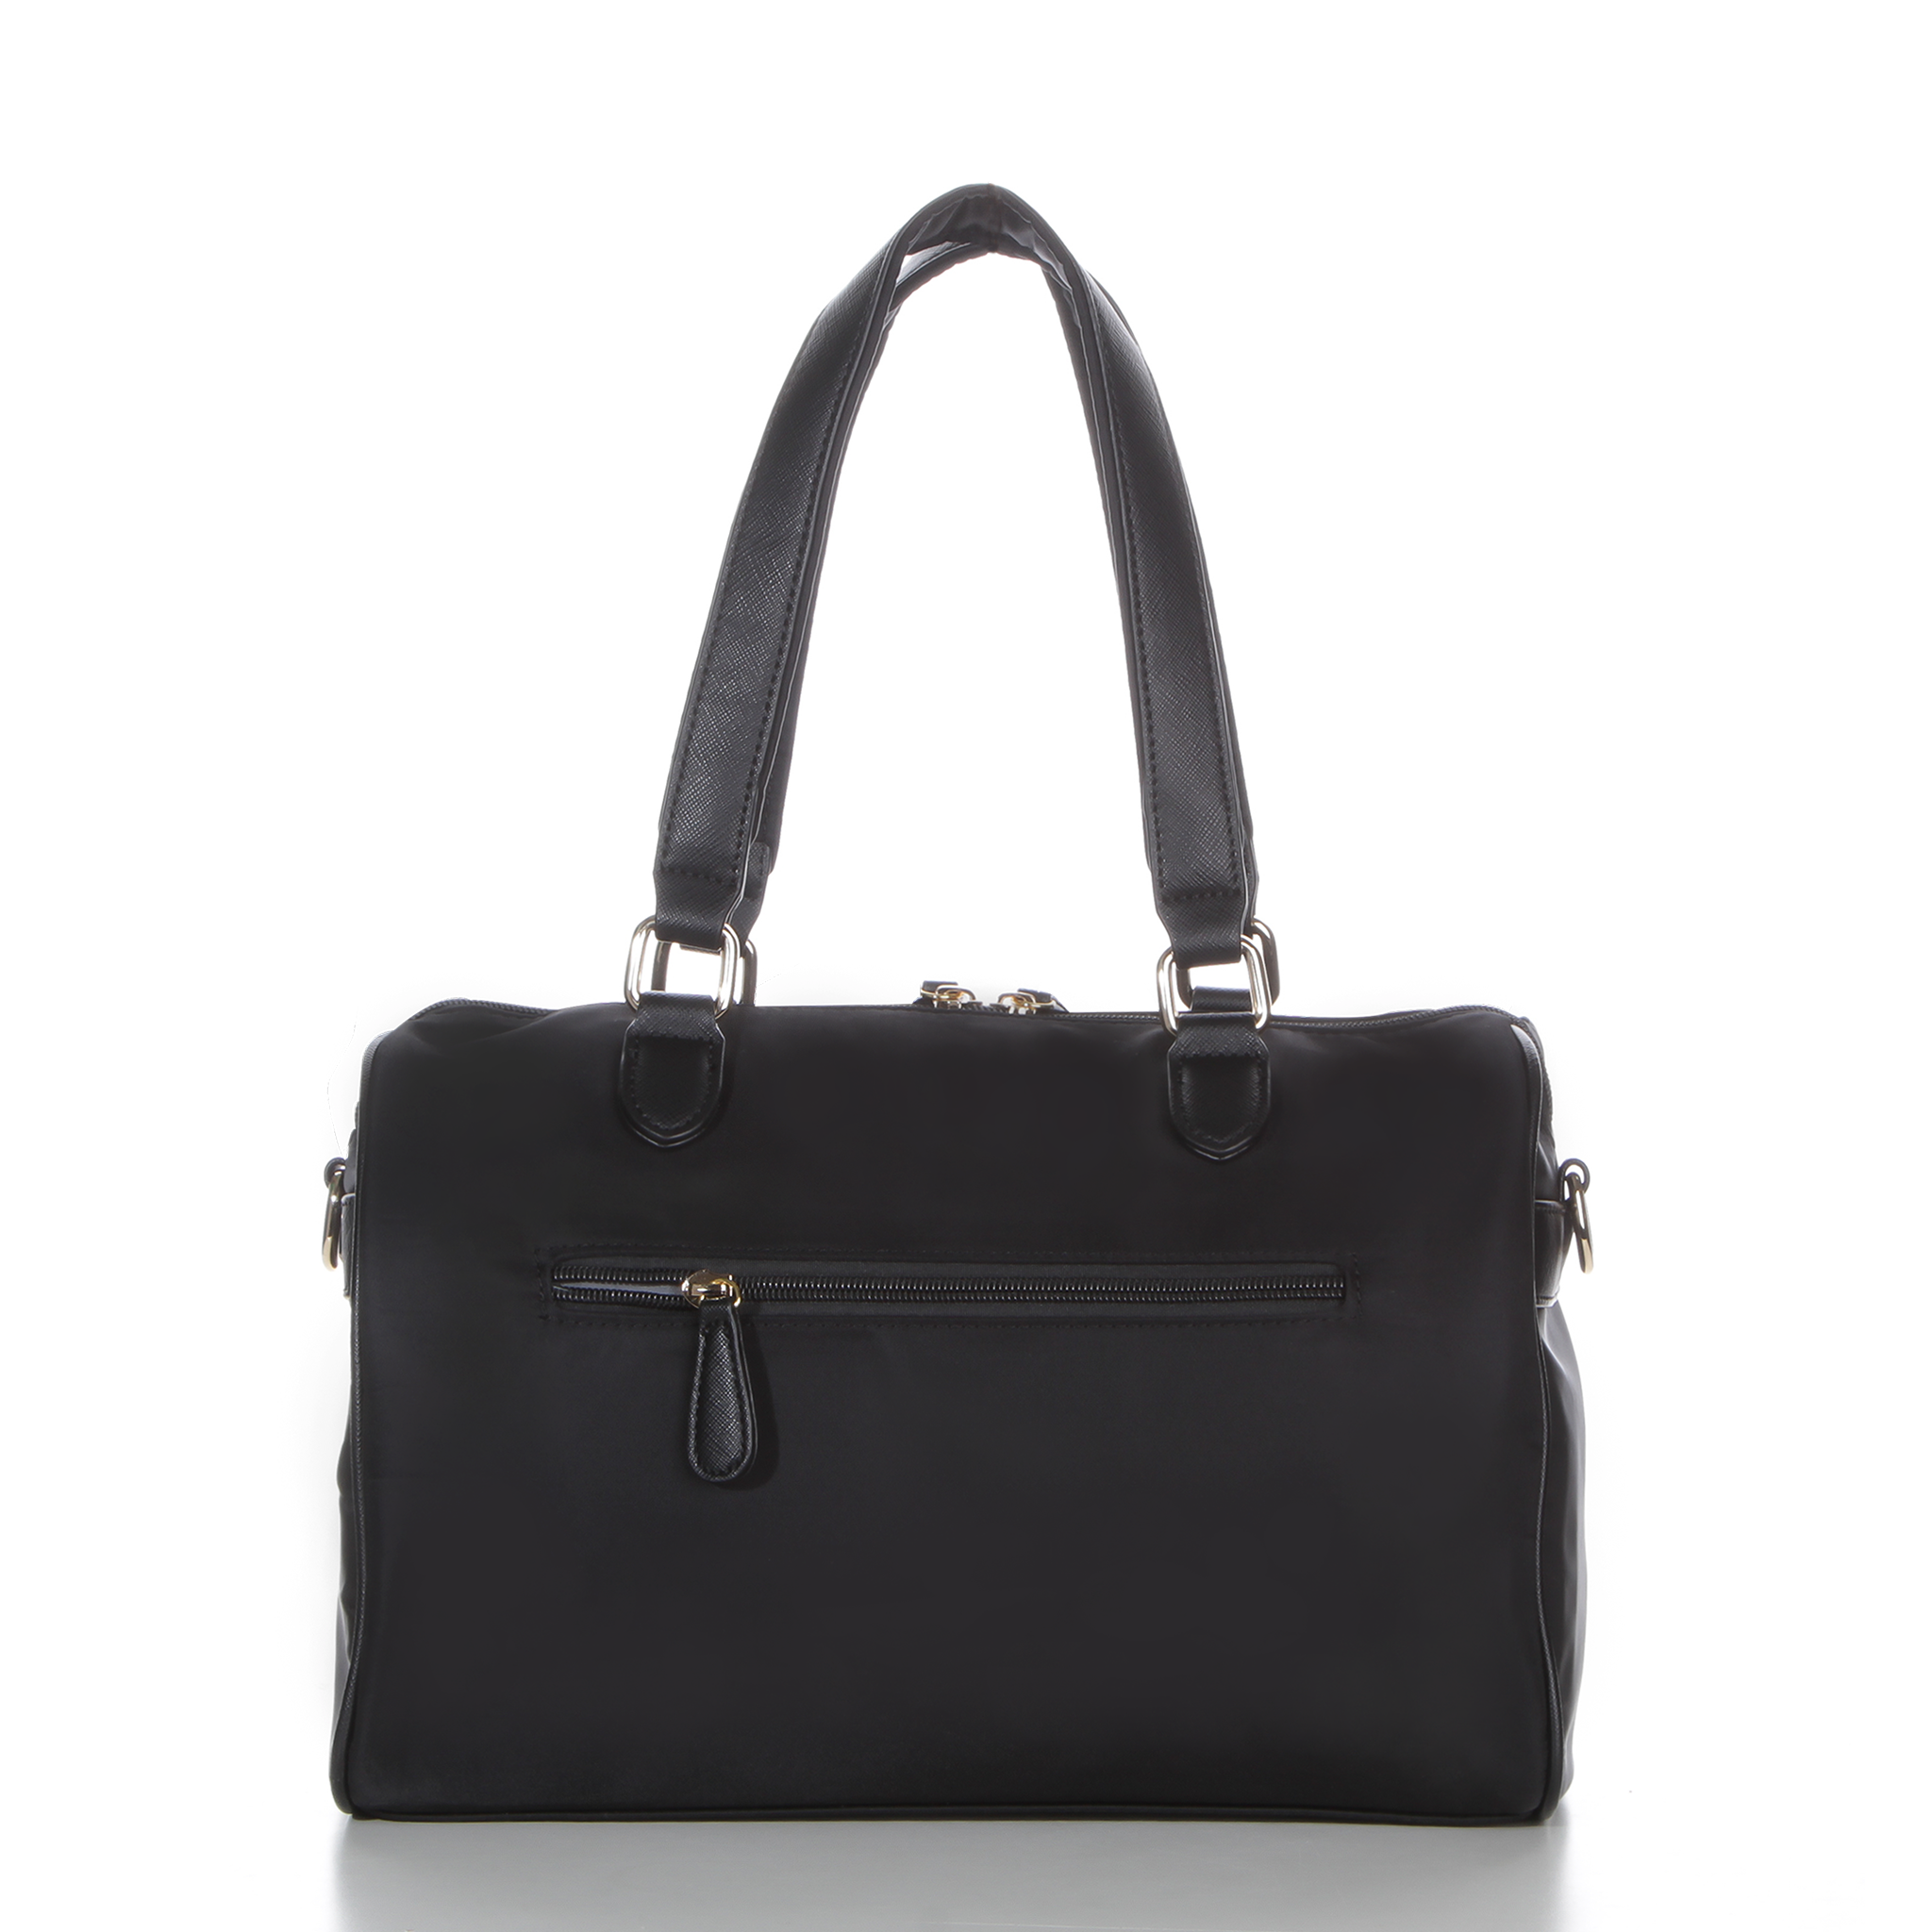 On the Go 3-in-1 Bag by DAZZ - Brilliant Black